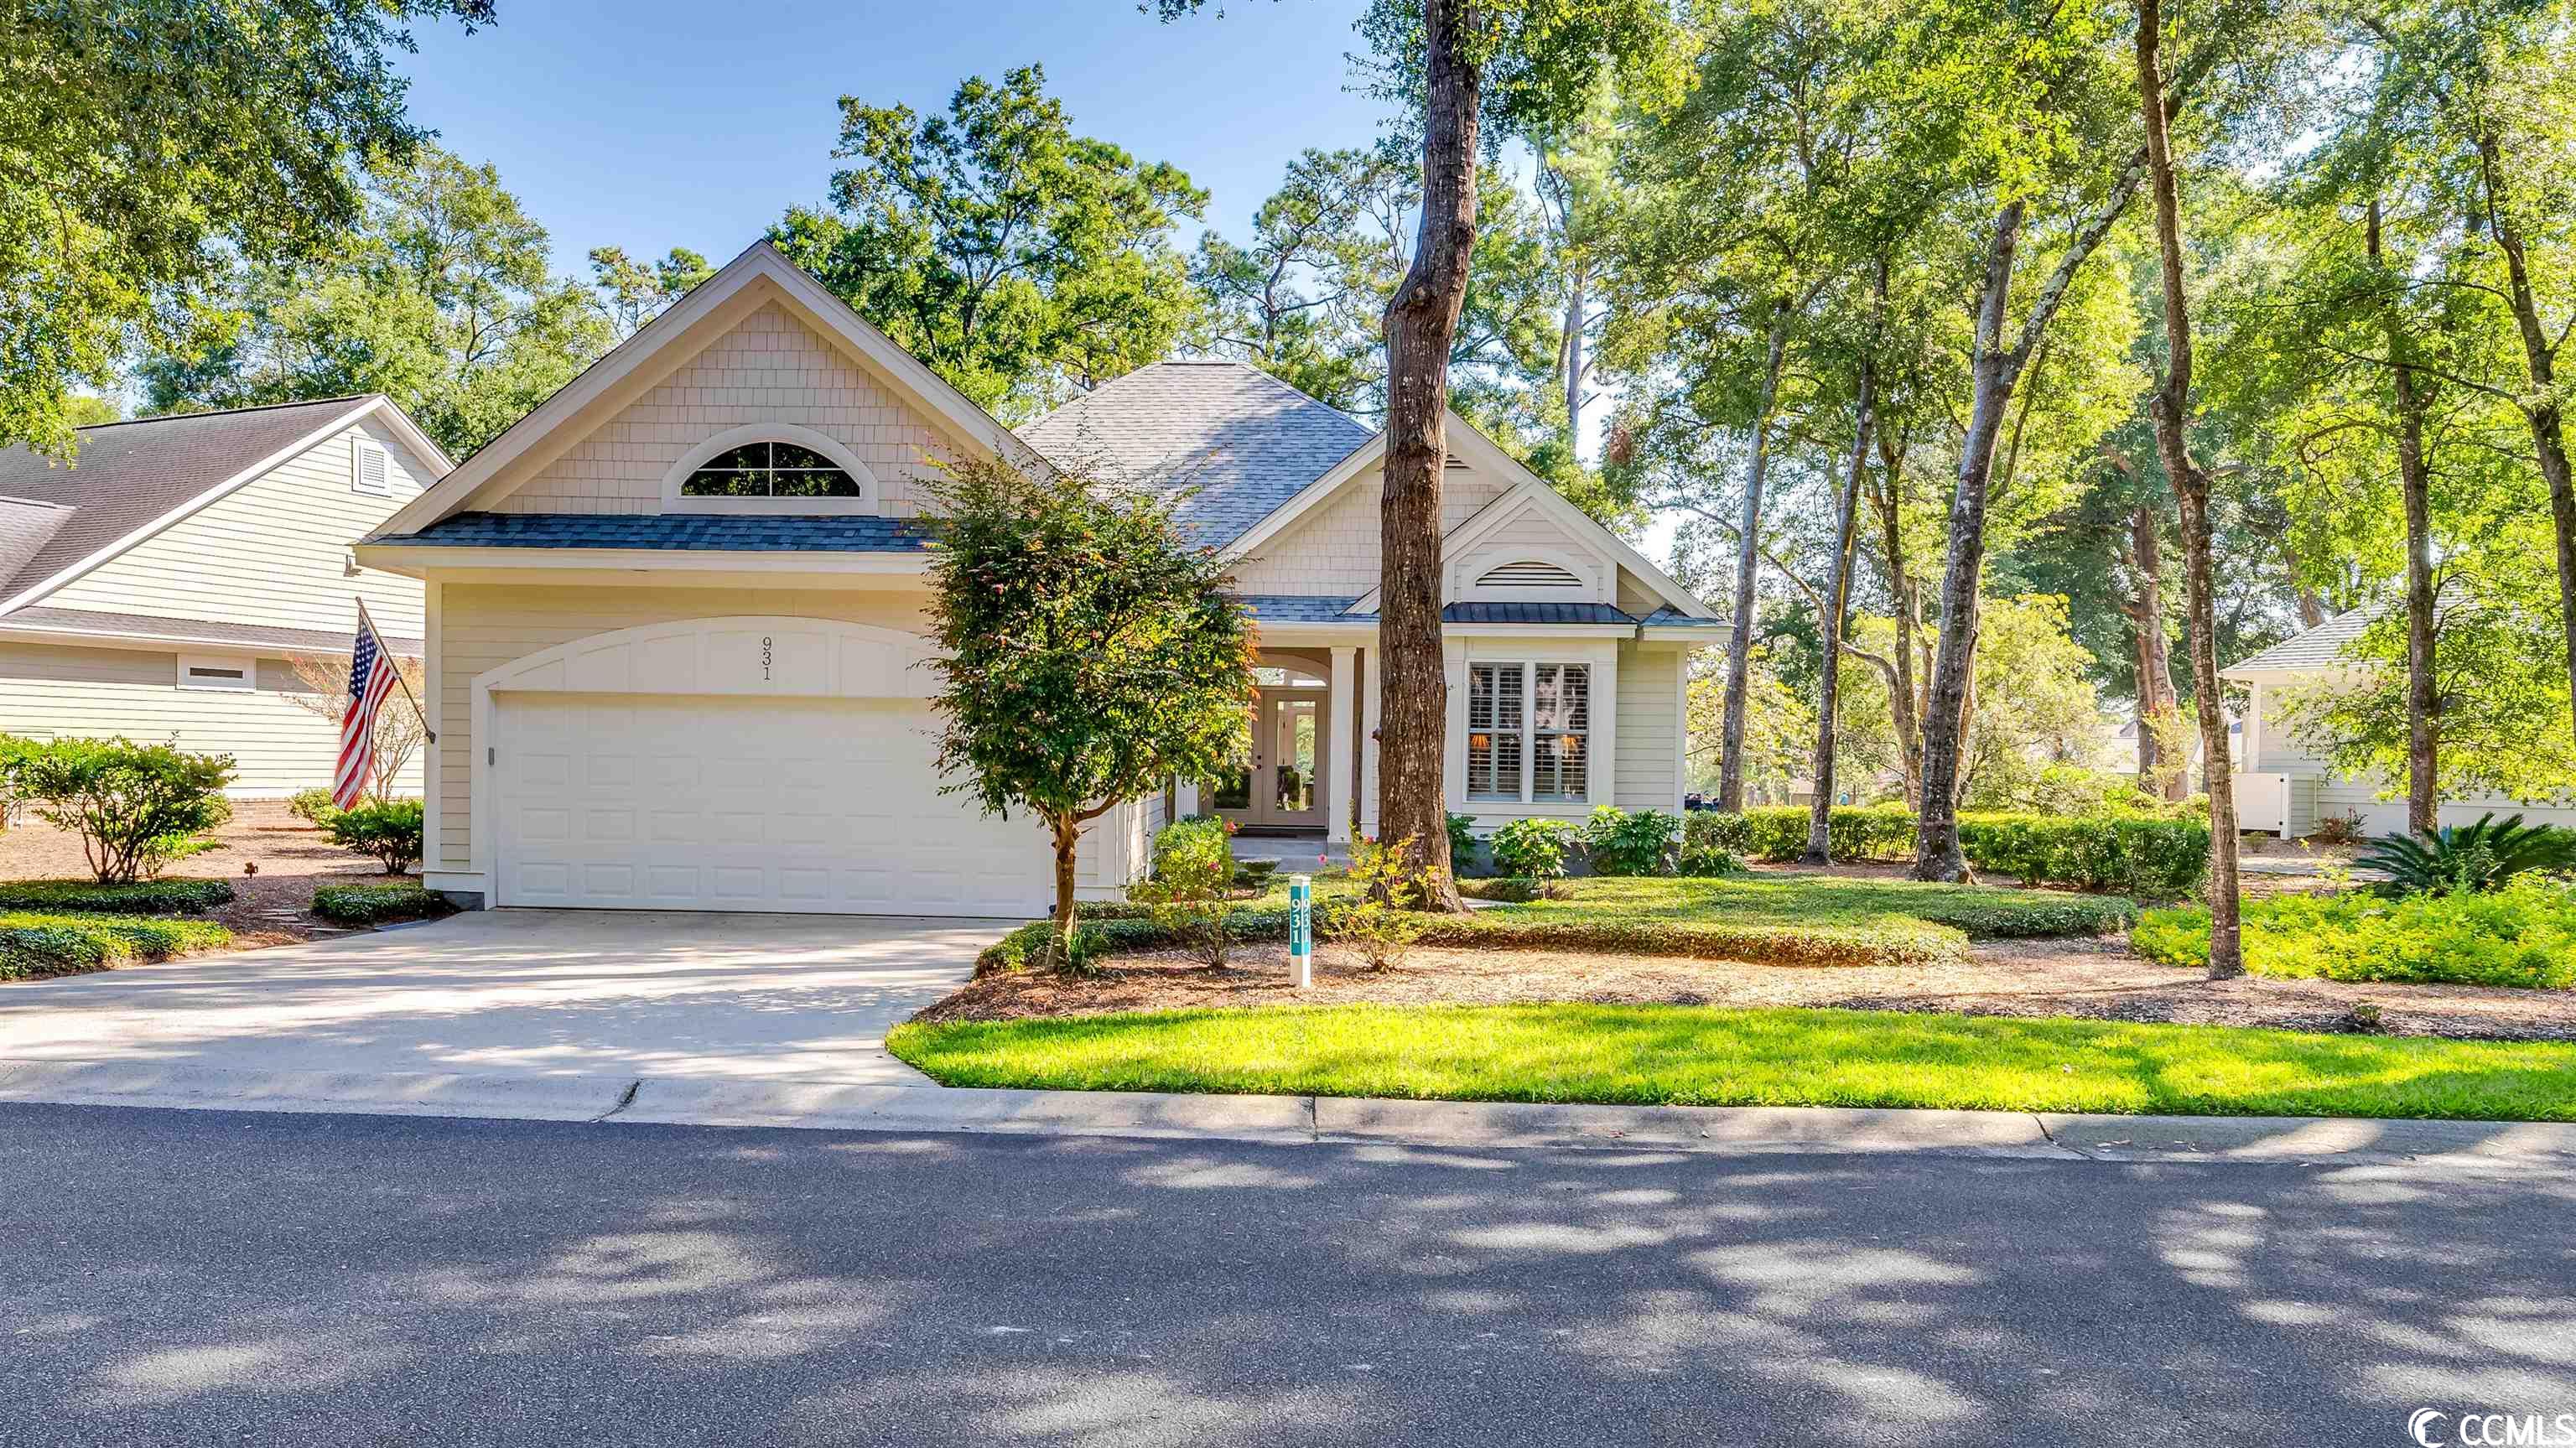 931 Morrall Dr. North Myrtle Beach, SC 29582